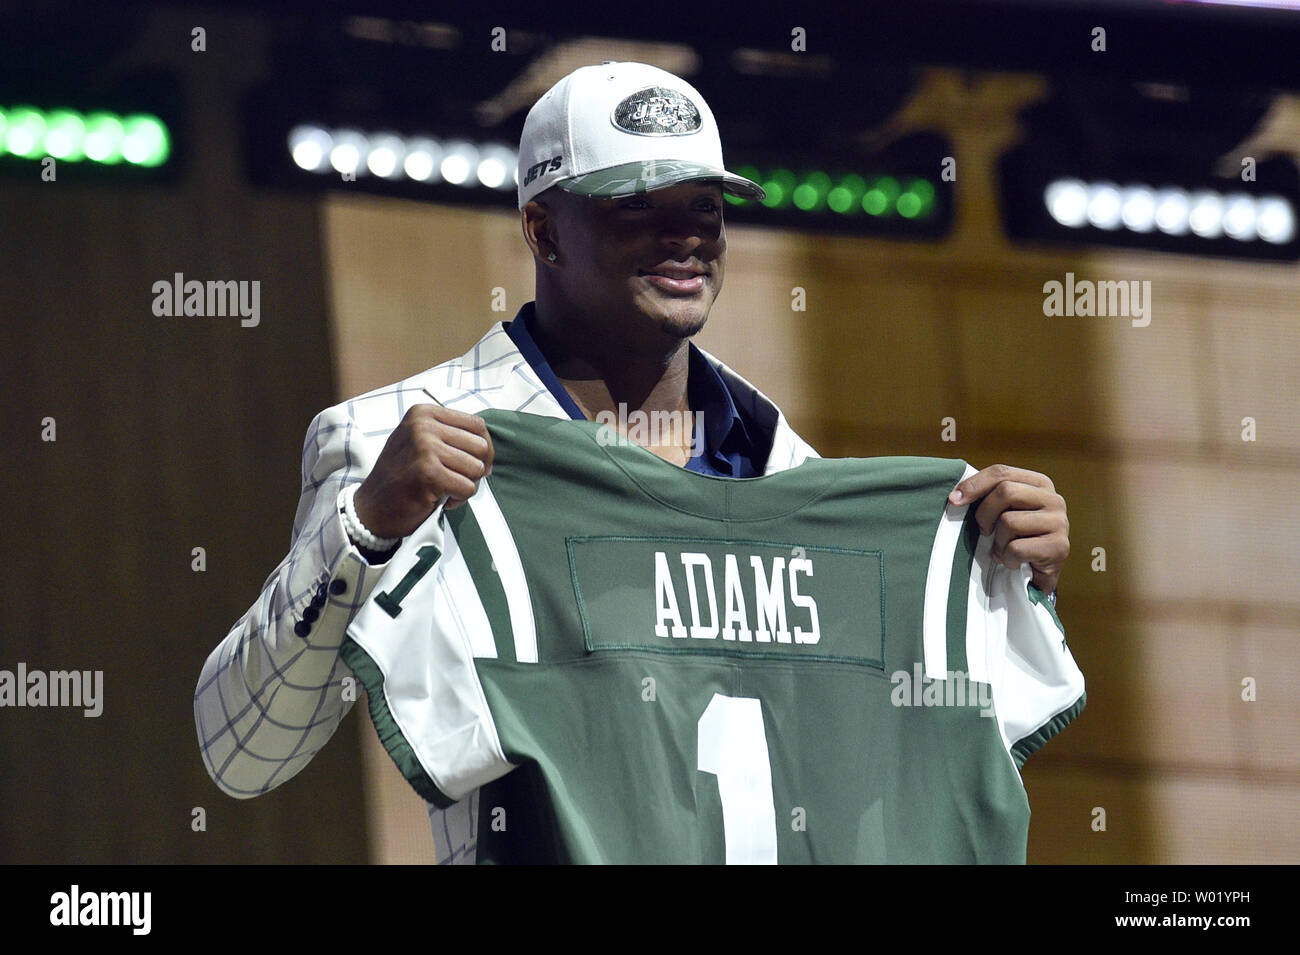 Jamal Adams poses for photographs after being selected by the New York Jets as the sixth overall pick in the 2017 NFL Draft at the NFL Draft Theater in Philadelphia, PA on April 27, 2017. The 82nd NFL Draft returned to Philadelphia for the first time in more than 50 years and runs from April 27-29. Photo by Derik Hamilton/UPI Stock Photo